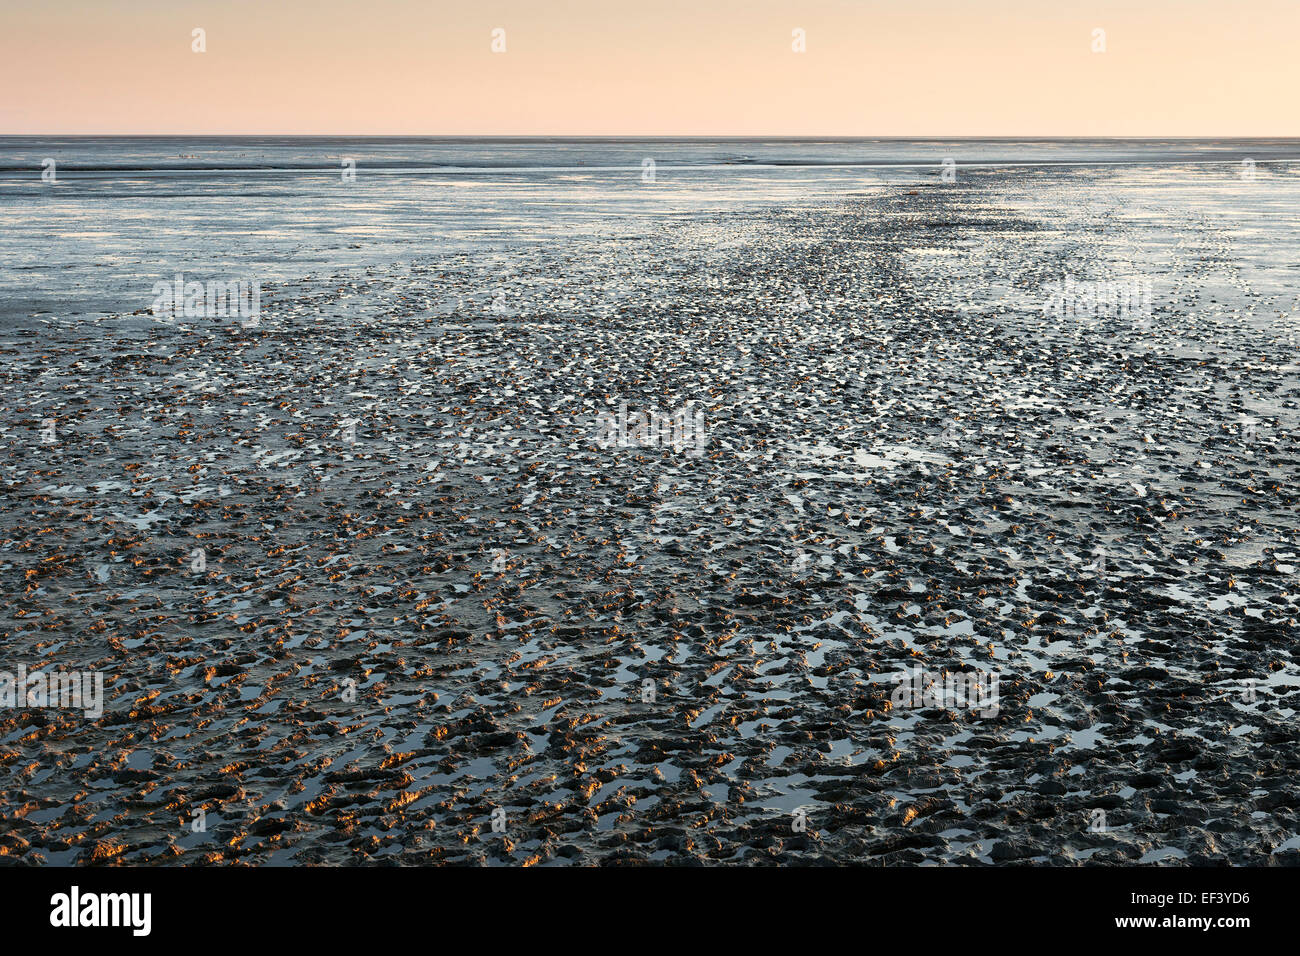 Image of mudflat landscape in Northern Germany at sunset Stock Photo